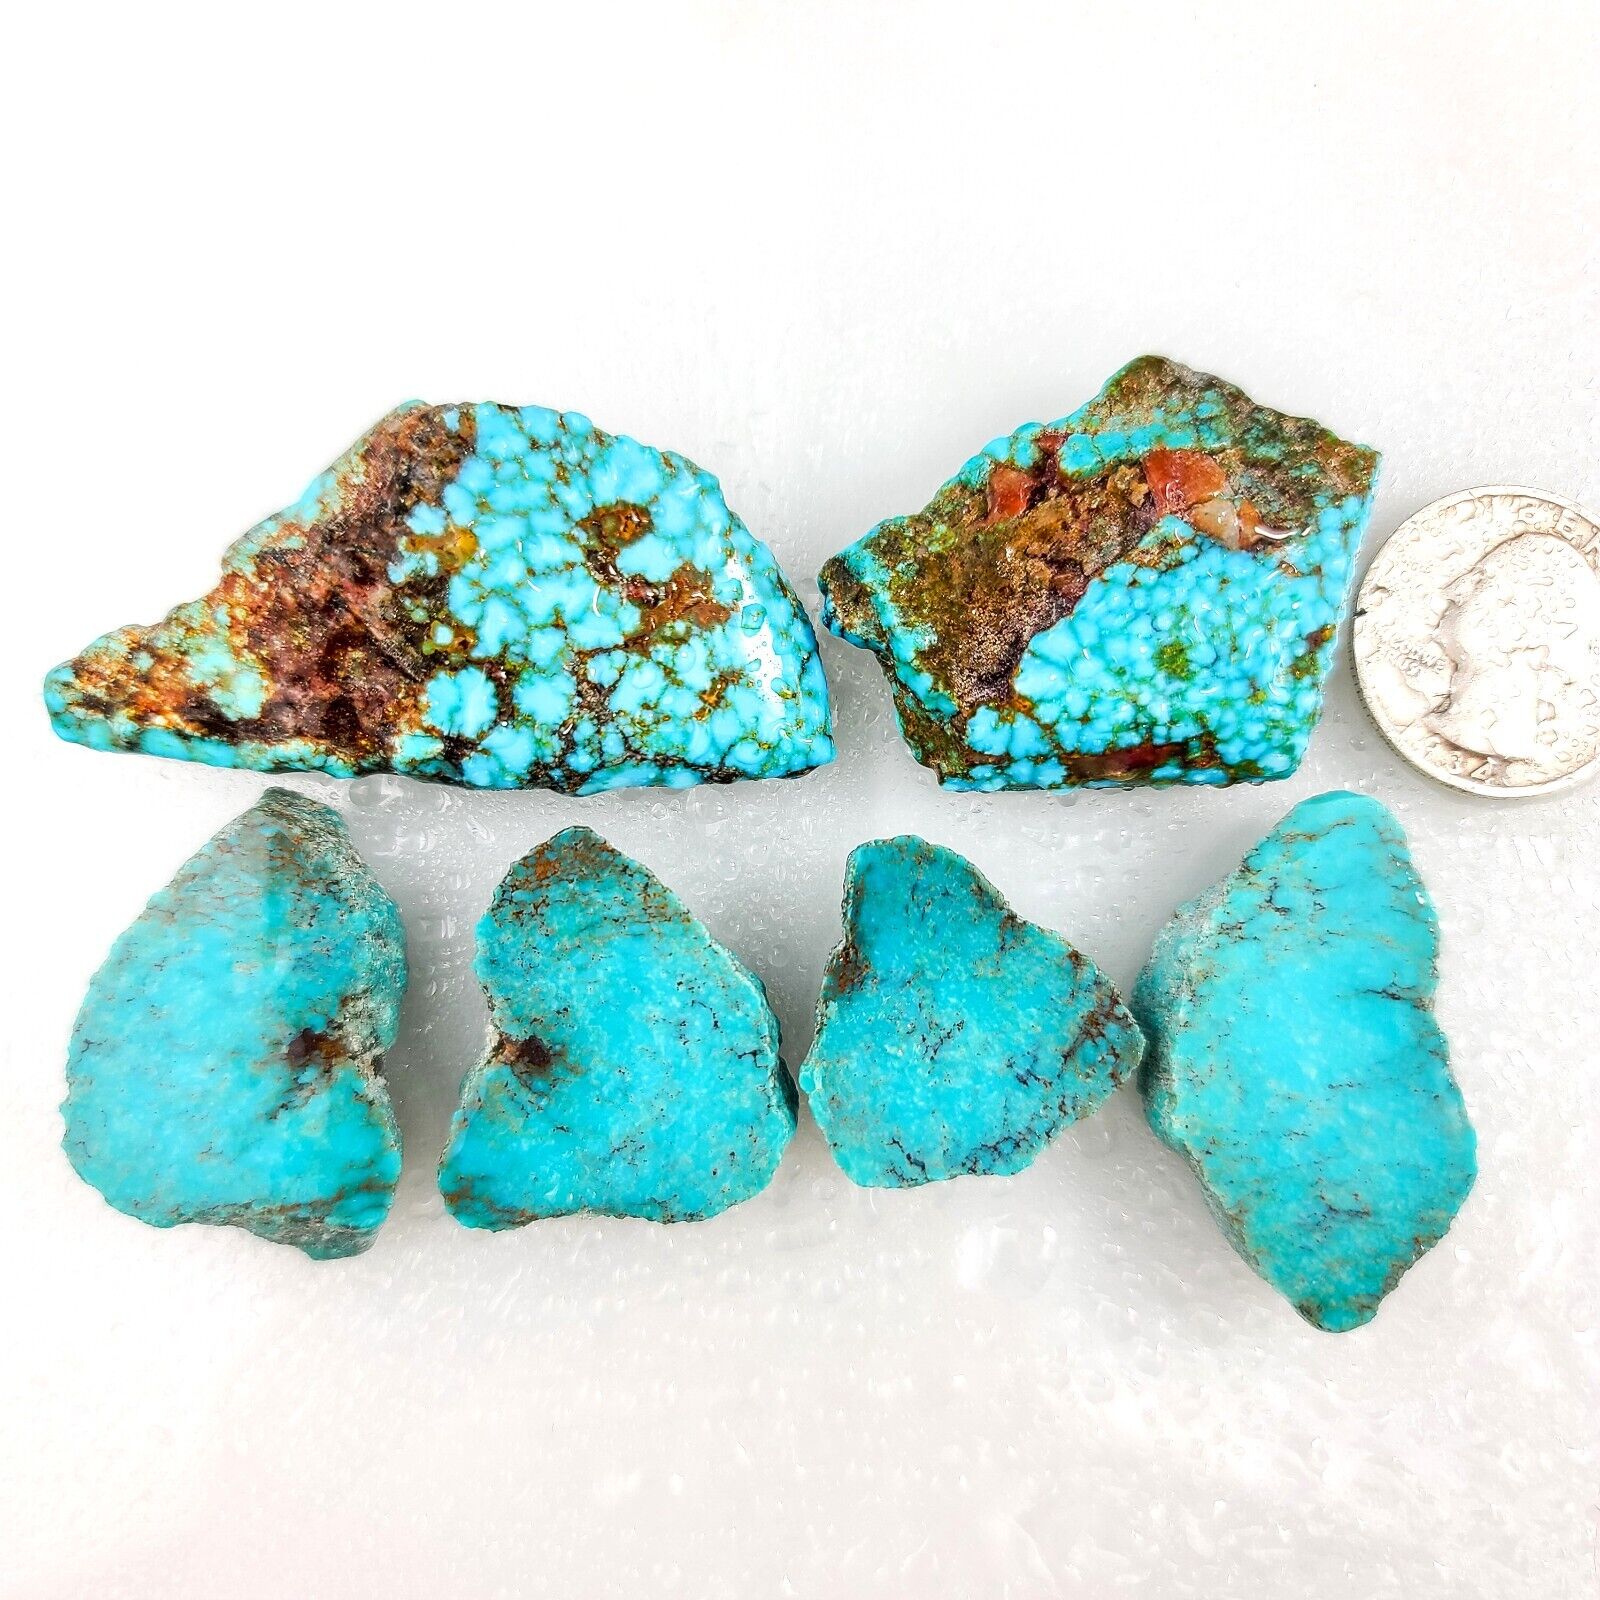 GS422 Select Turquoise rough mixed slabs 67.8 grams, including red spiderweb